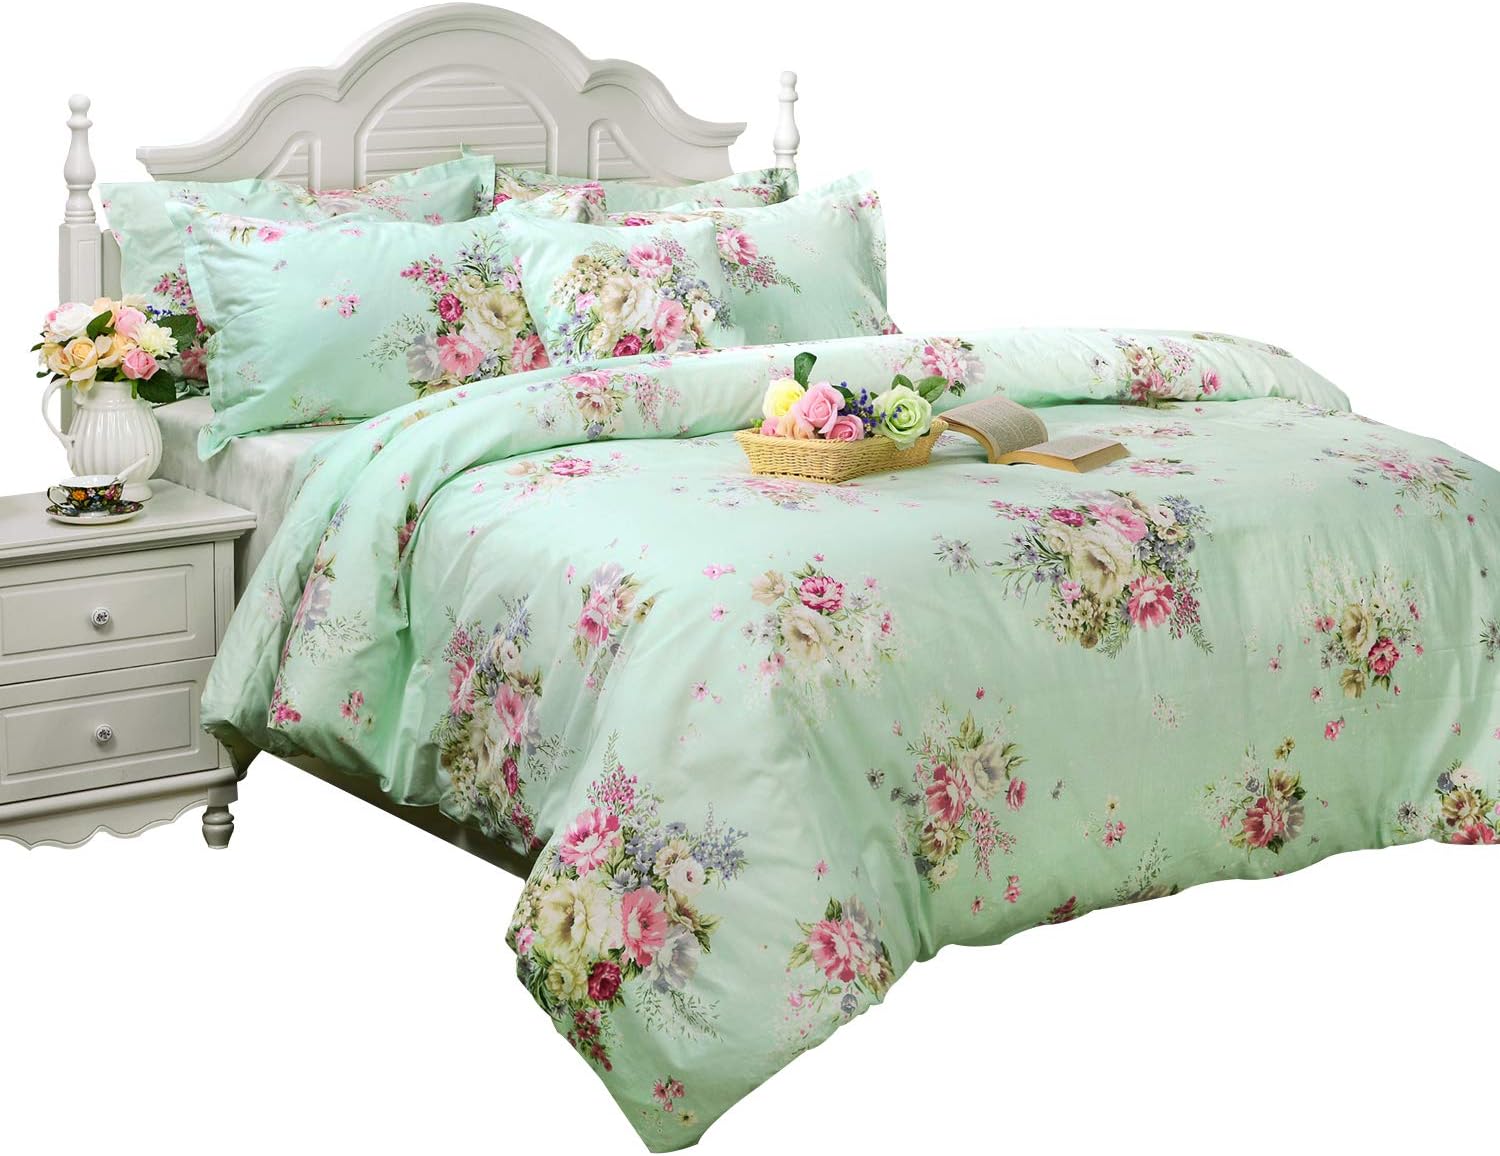 FADFAY Green Floral Duvet Cover Sets Vintage Flower Printed Bedding Ultra Soft 100% Cotton Designer Bedding Set 3 Pieces, 1duvet Cover & 2pillowcases (Queen Size, Simple Style)